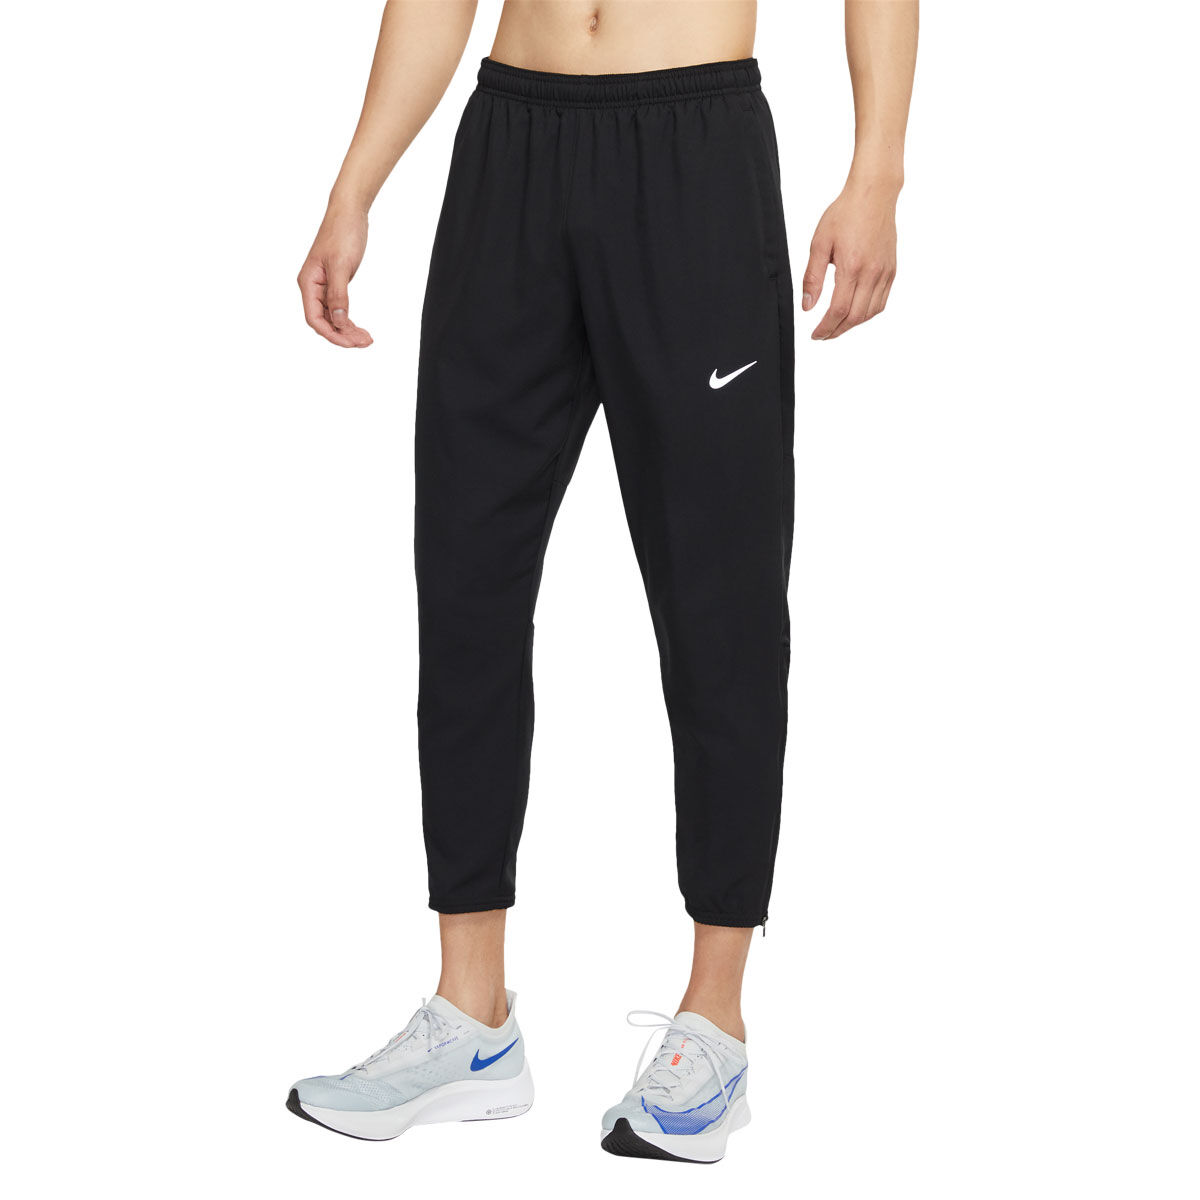 Nike Dri-FIT Fast Women's Mid-Rise 7/8 Warm-Up Running Trousers. Nike BE